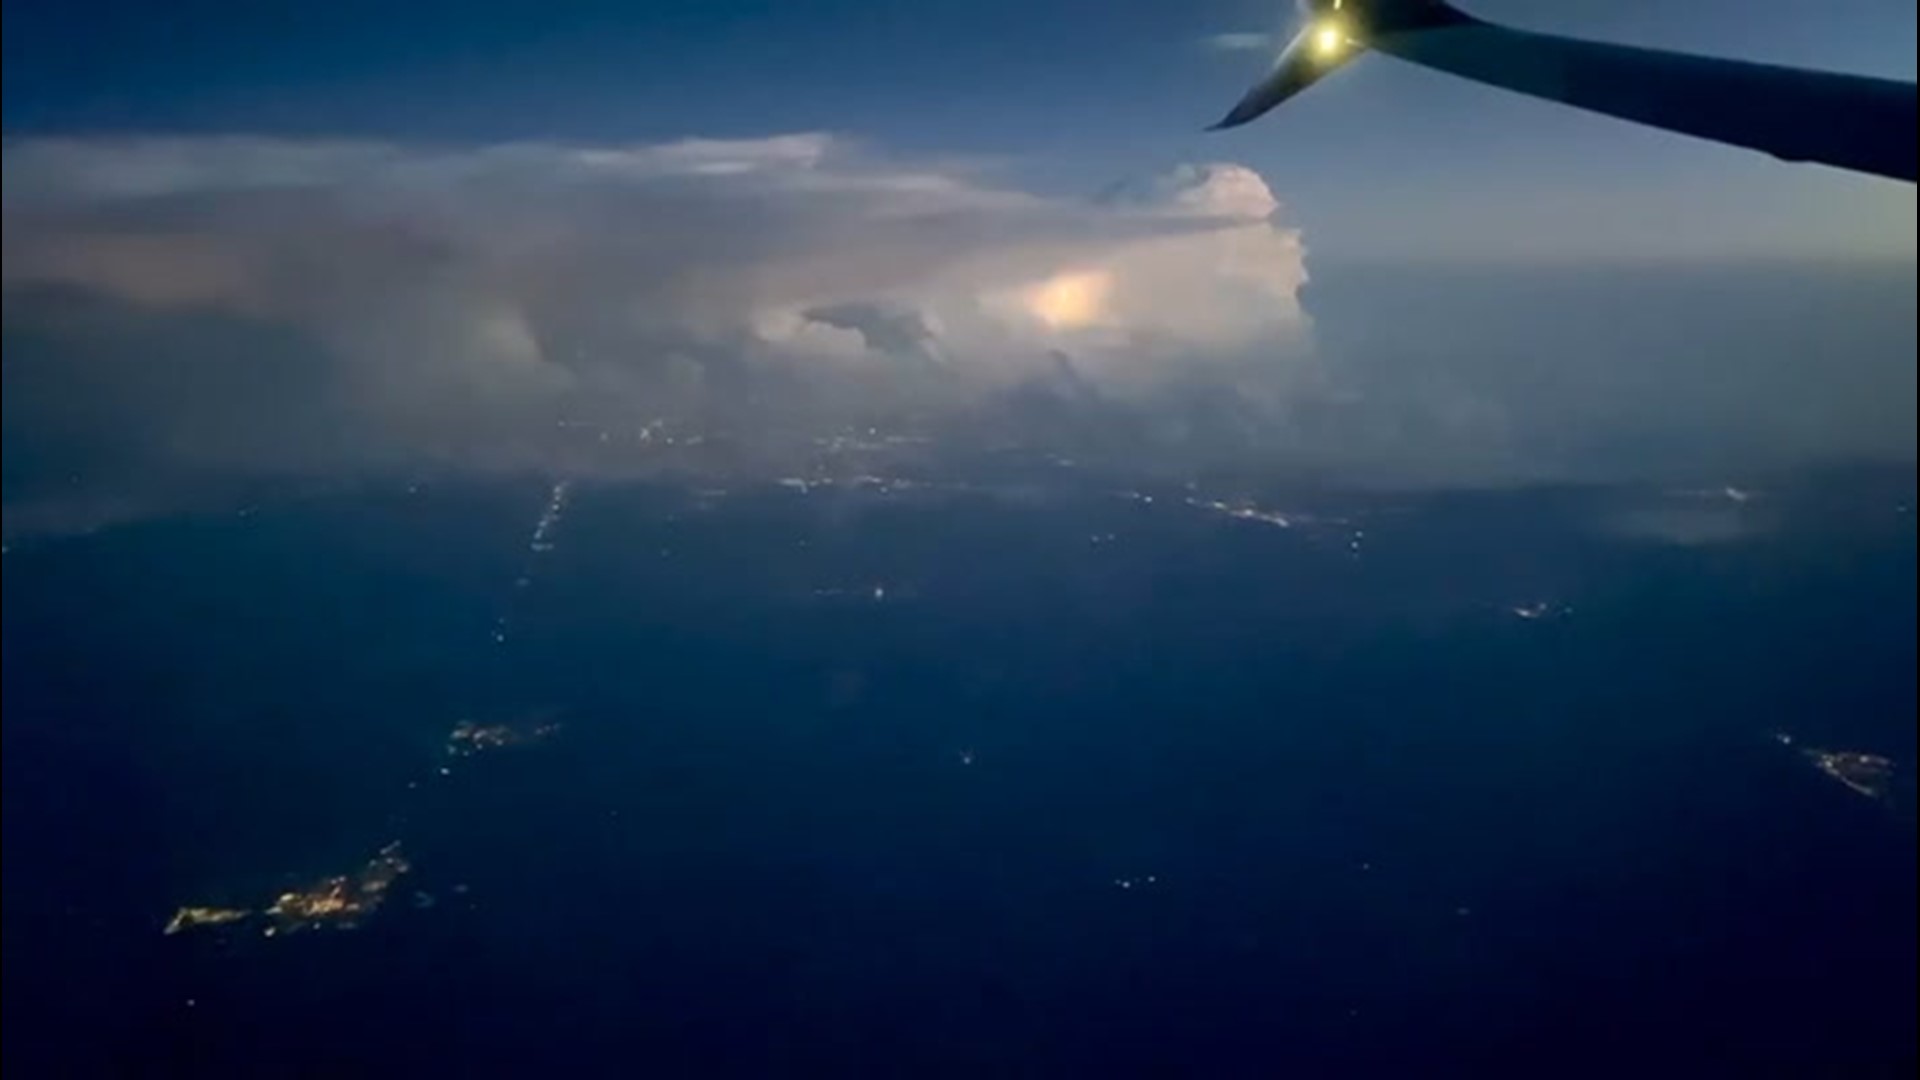 Hitesh Ochani was flying from Detroit to Seattle on Aug. 9, when he captured a thunderstorm putting on an epic lightning show off in the distance.